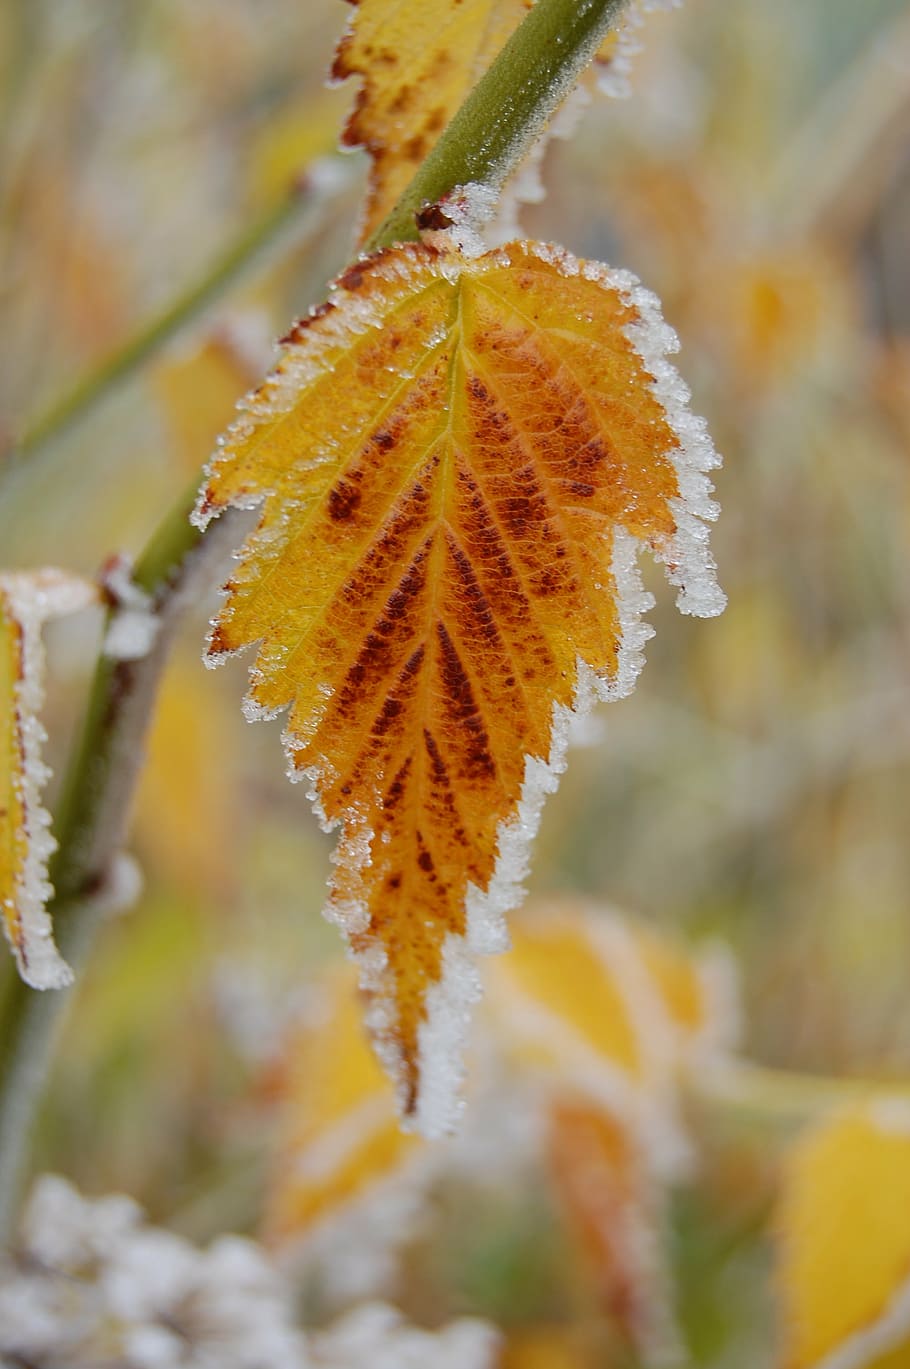 frost, autumn, leaf, hoarfrost, yellow, cold, beauty in nature, close-up, plant, growth